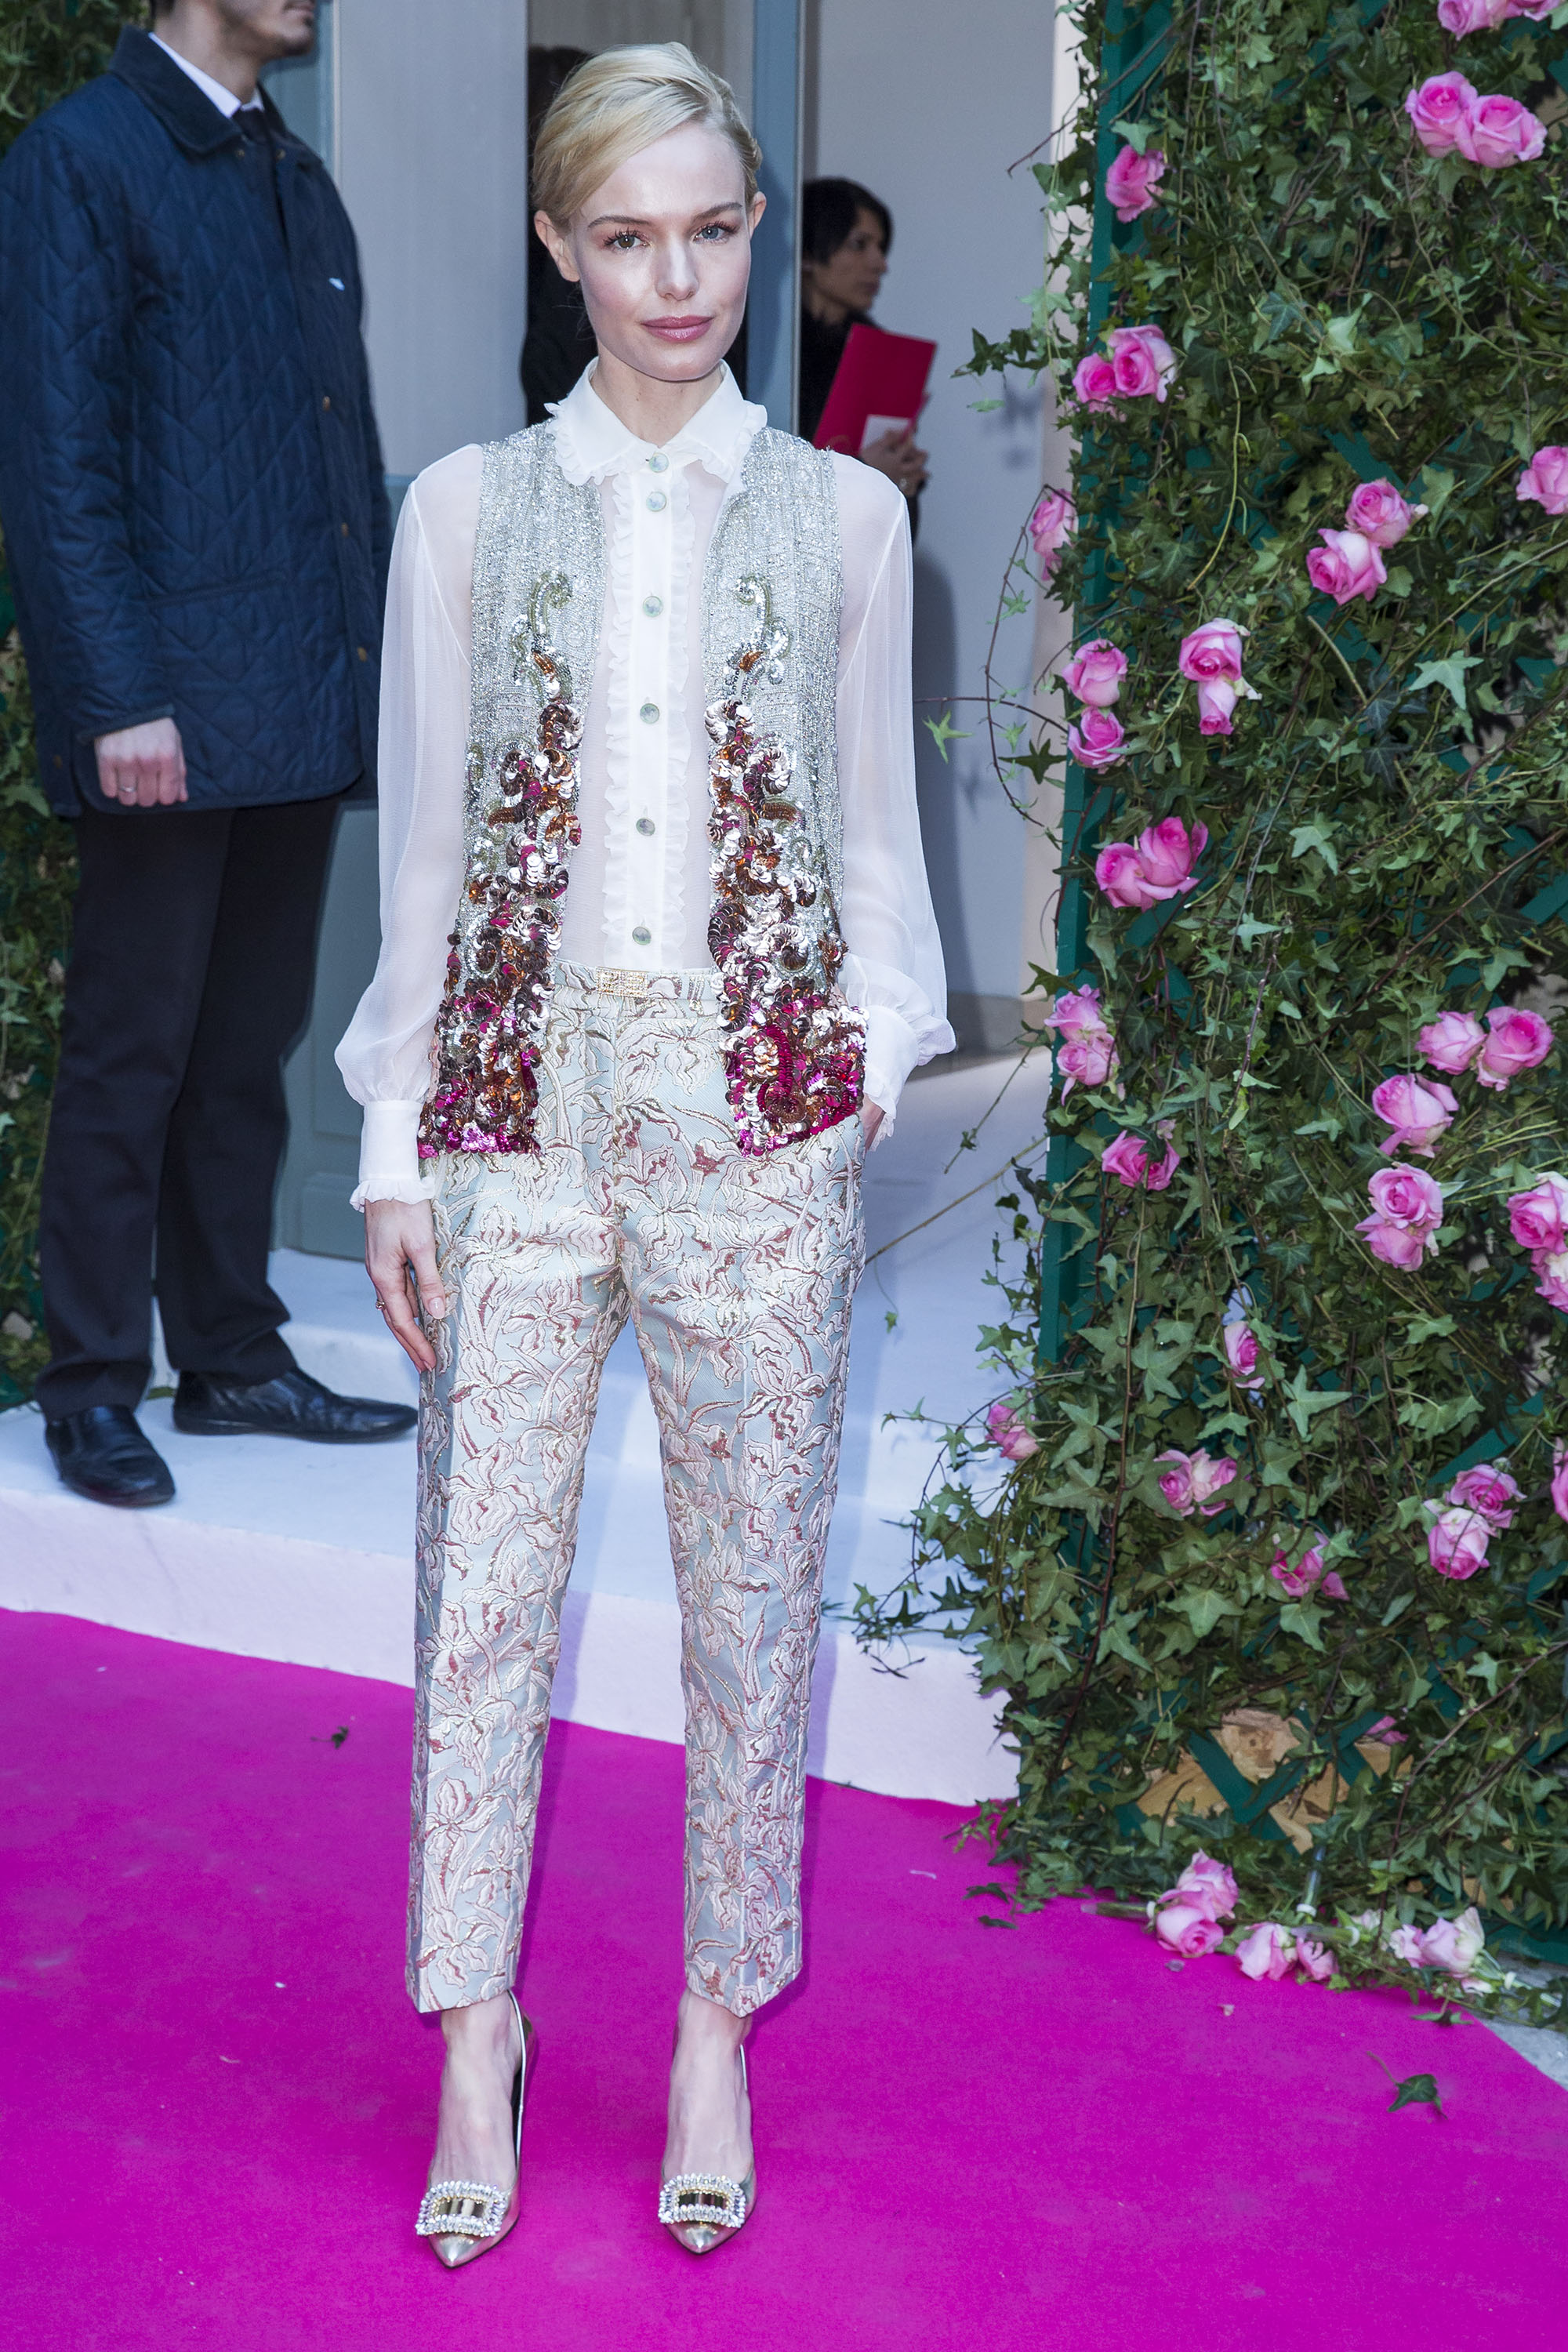 Haute Couture Week Fugs and Fabs: Celebs at Dior and Schiaparelli